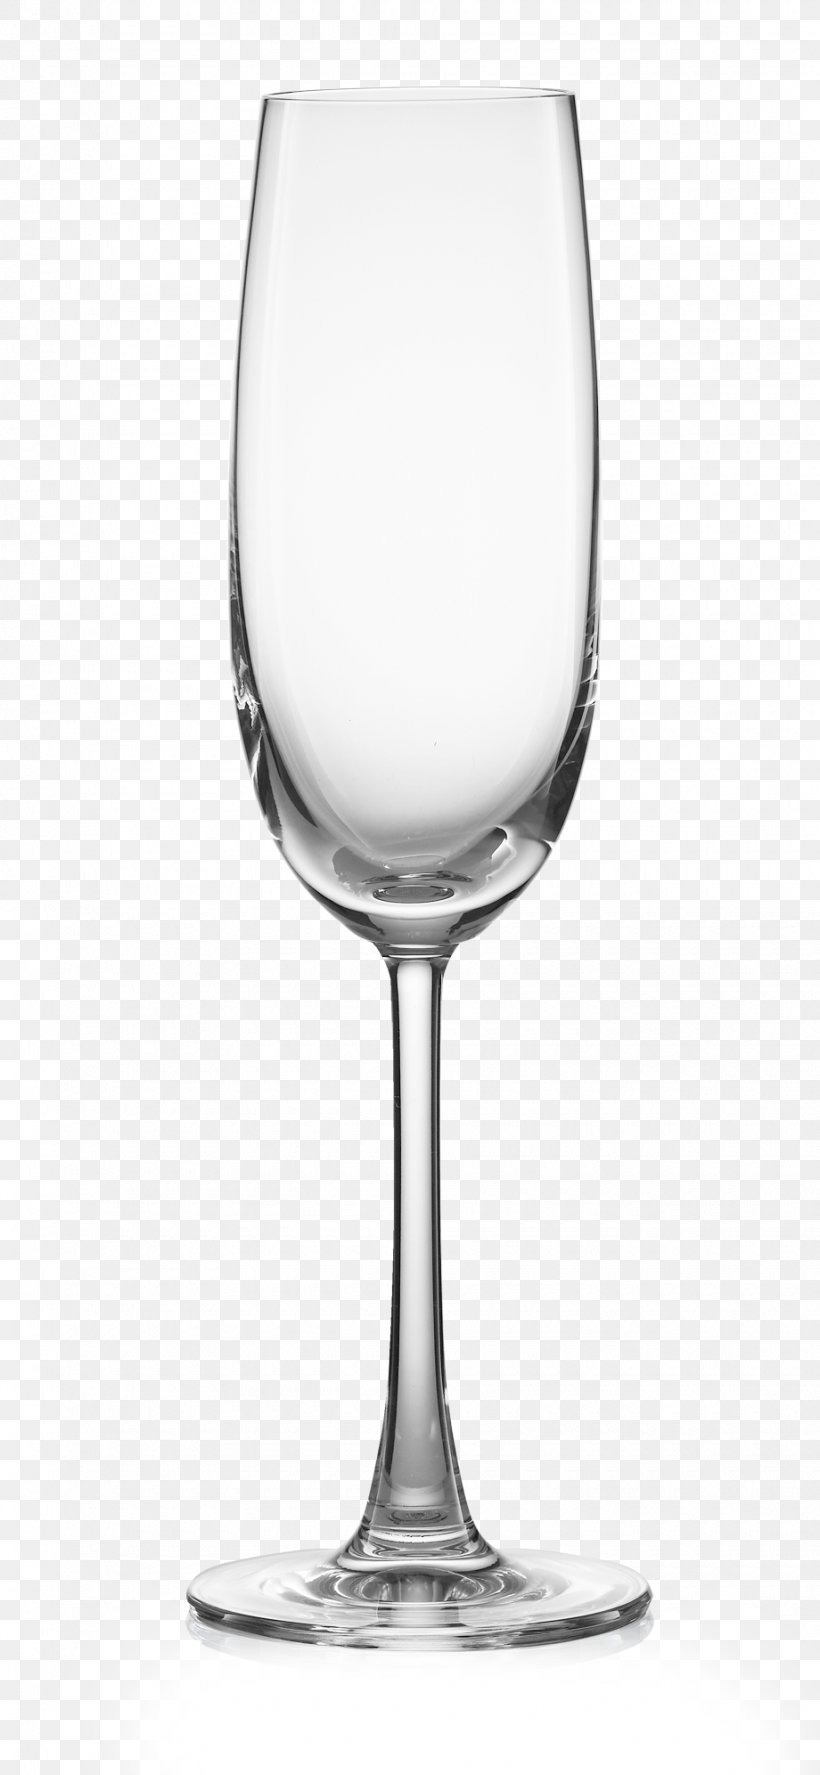 Whiskey Wine Cocktail Snifter Glencairn Whisky Glass, PNG, 920x1992px, Whiskey, Beer Glass, Beer Glasses, Champagne Glass, Champagne Stemware Download Free